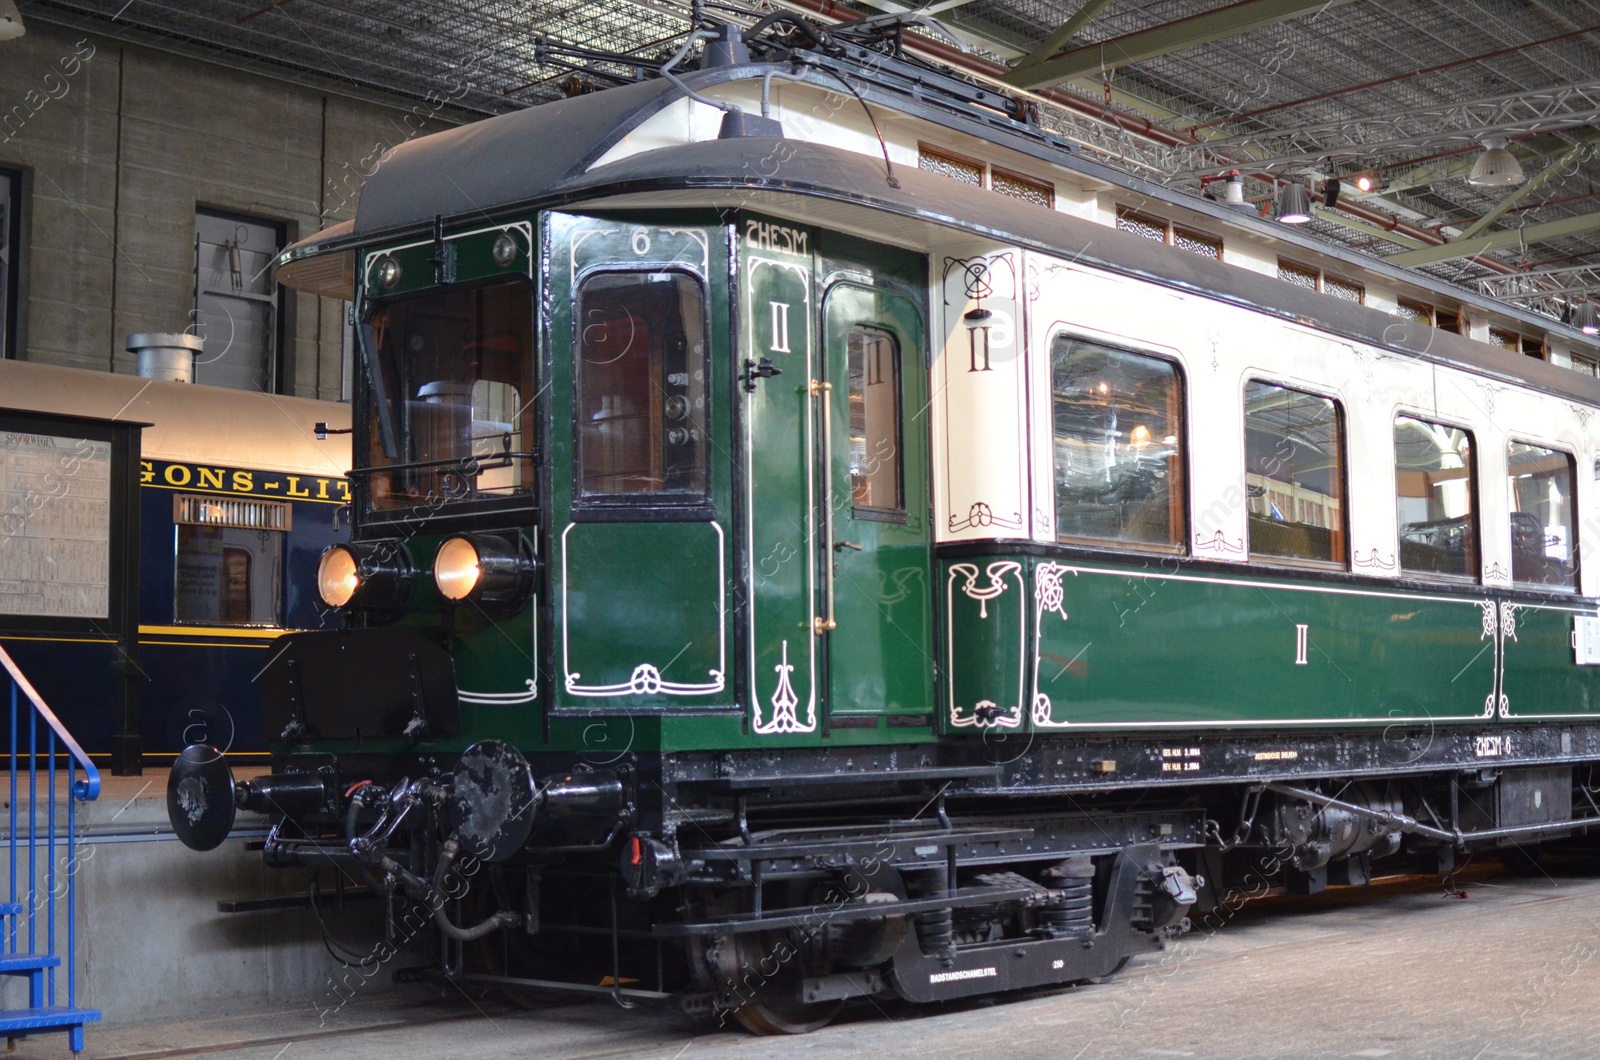 Photo of Utrecht, Netherlands - July 23, 2022: Electric trolley on display at Spoorwegmuseum